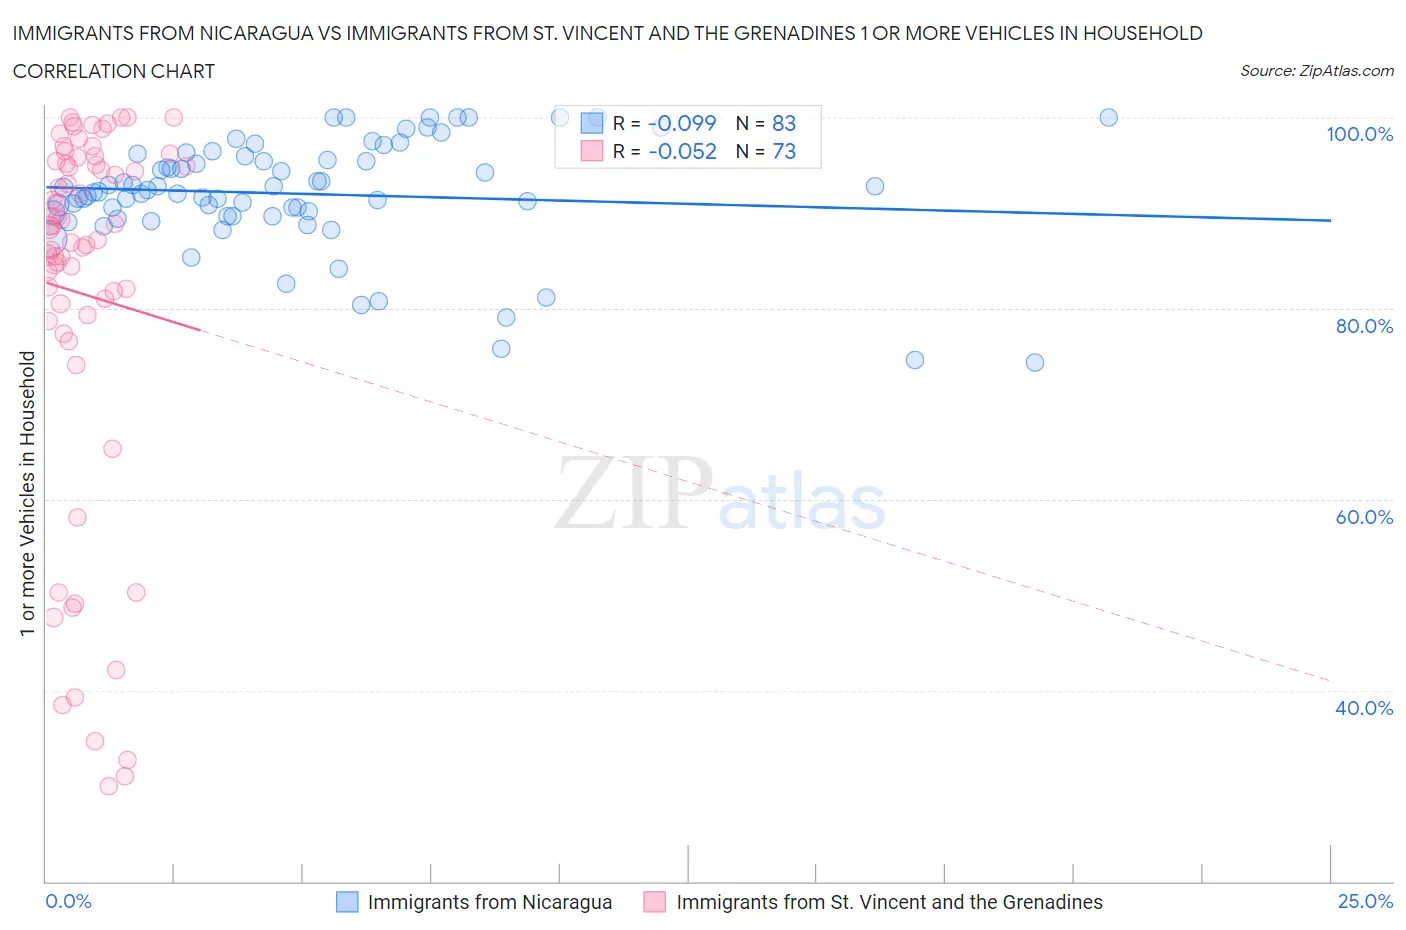 Immigrants from Nicaragua vs Immigrants from St. Vincent and the Grenadines 1 or more Vehicles in Household